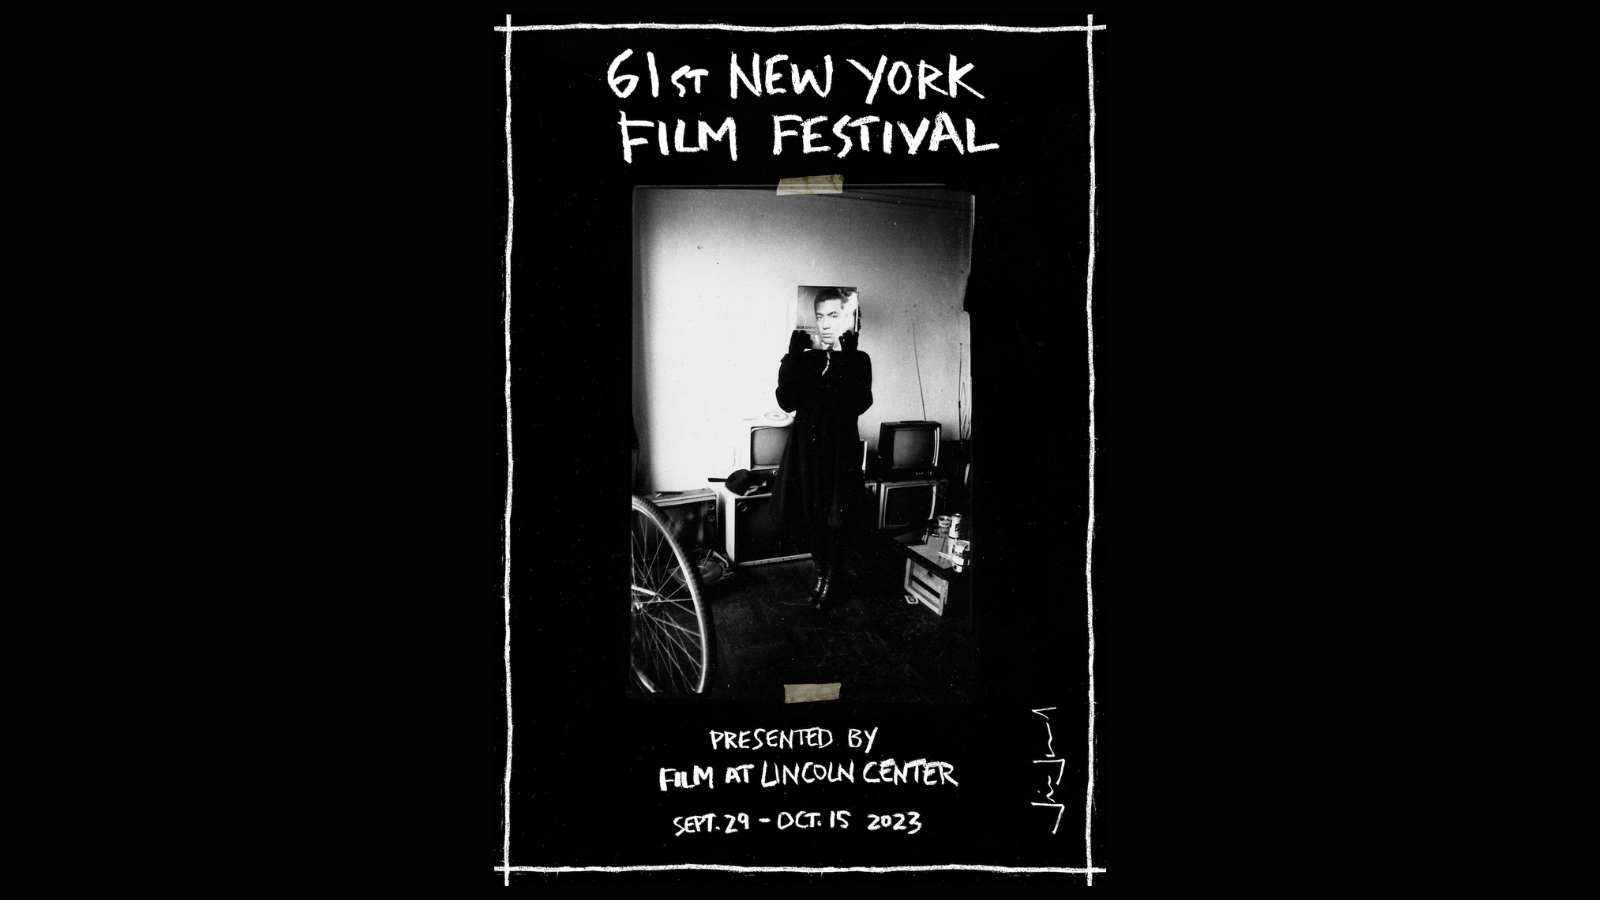 61st New York Film Festival Poster by Jim Jarmusch Unveiled